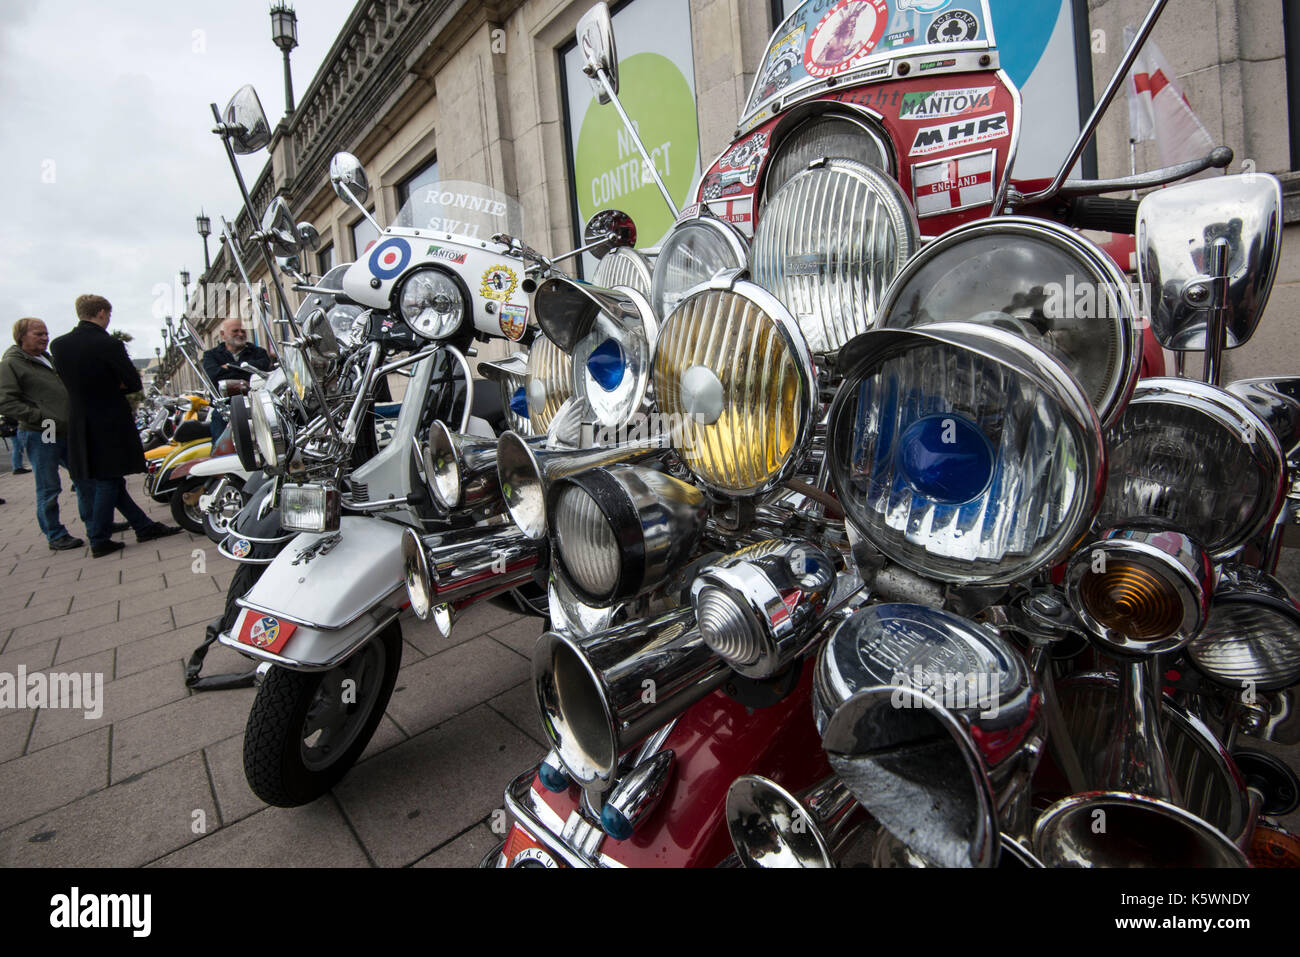 Ace Cafe Reunion 2017 Brighton Burn-Up, Thousands of bikers Descended on the city of Brighton, converging on Madeira Drive for the annual motorcycle r Stock Photo